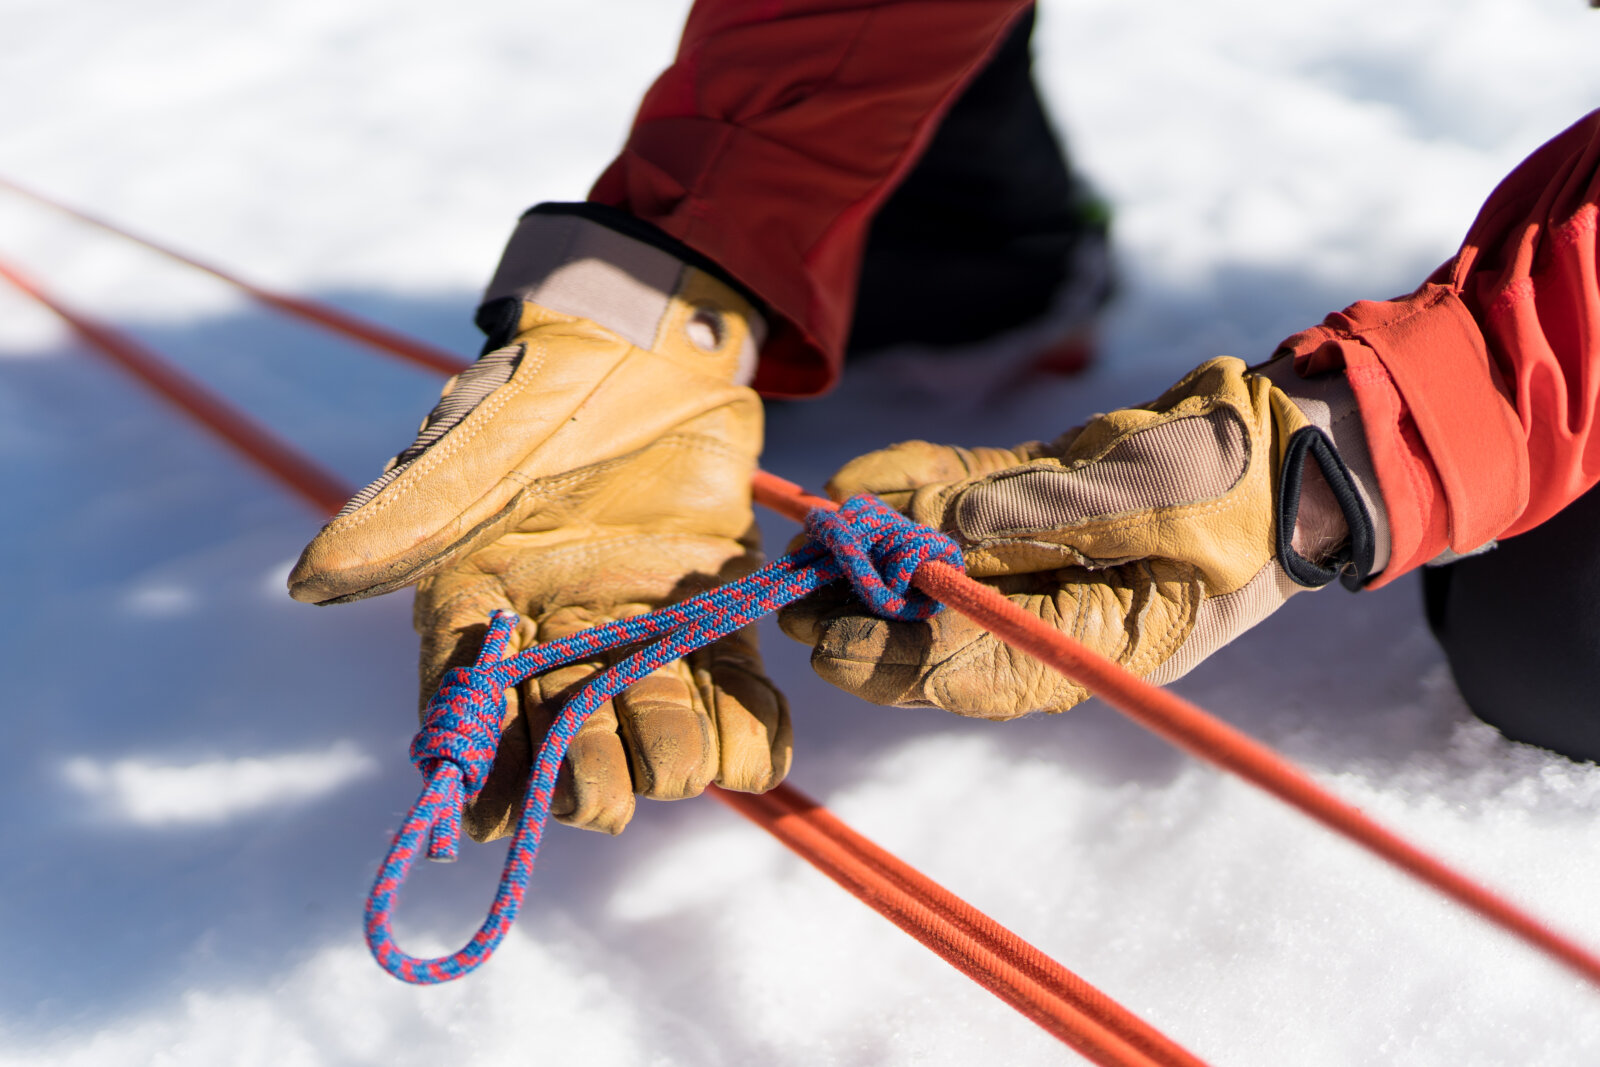 Guide shows rope skills during an Intro to Mountaineering course near Lake Tahoe in the Sierra Nevada mountains with Alpenglow Expeditions' professional mountain guides.